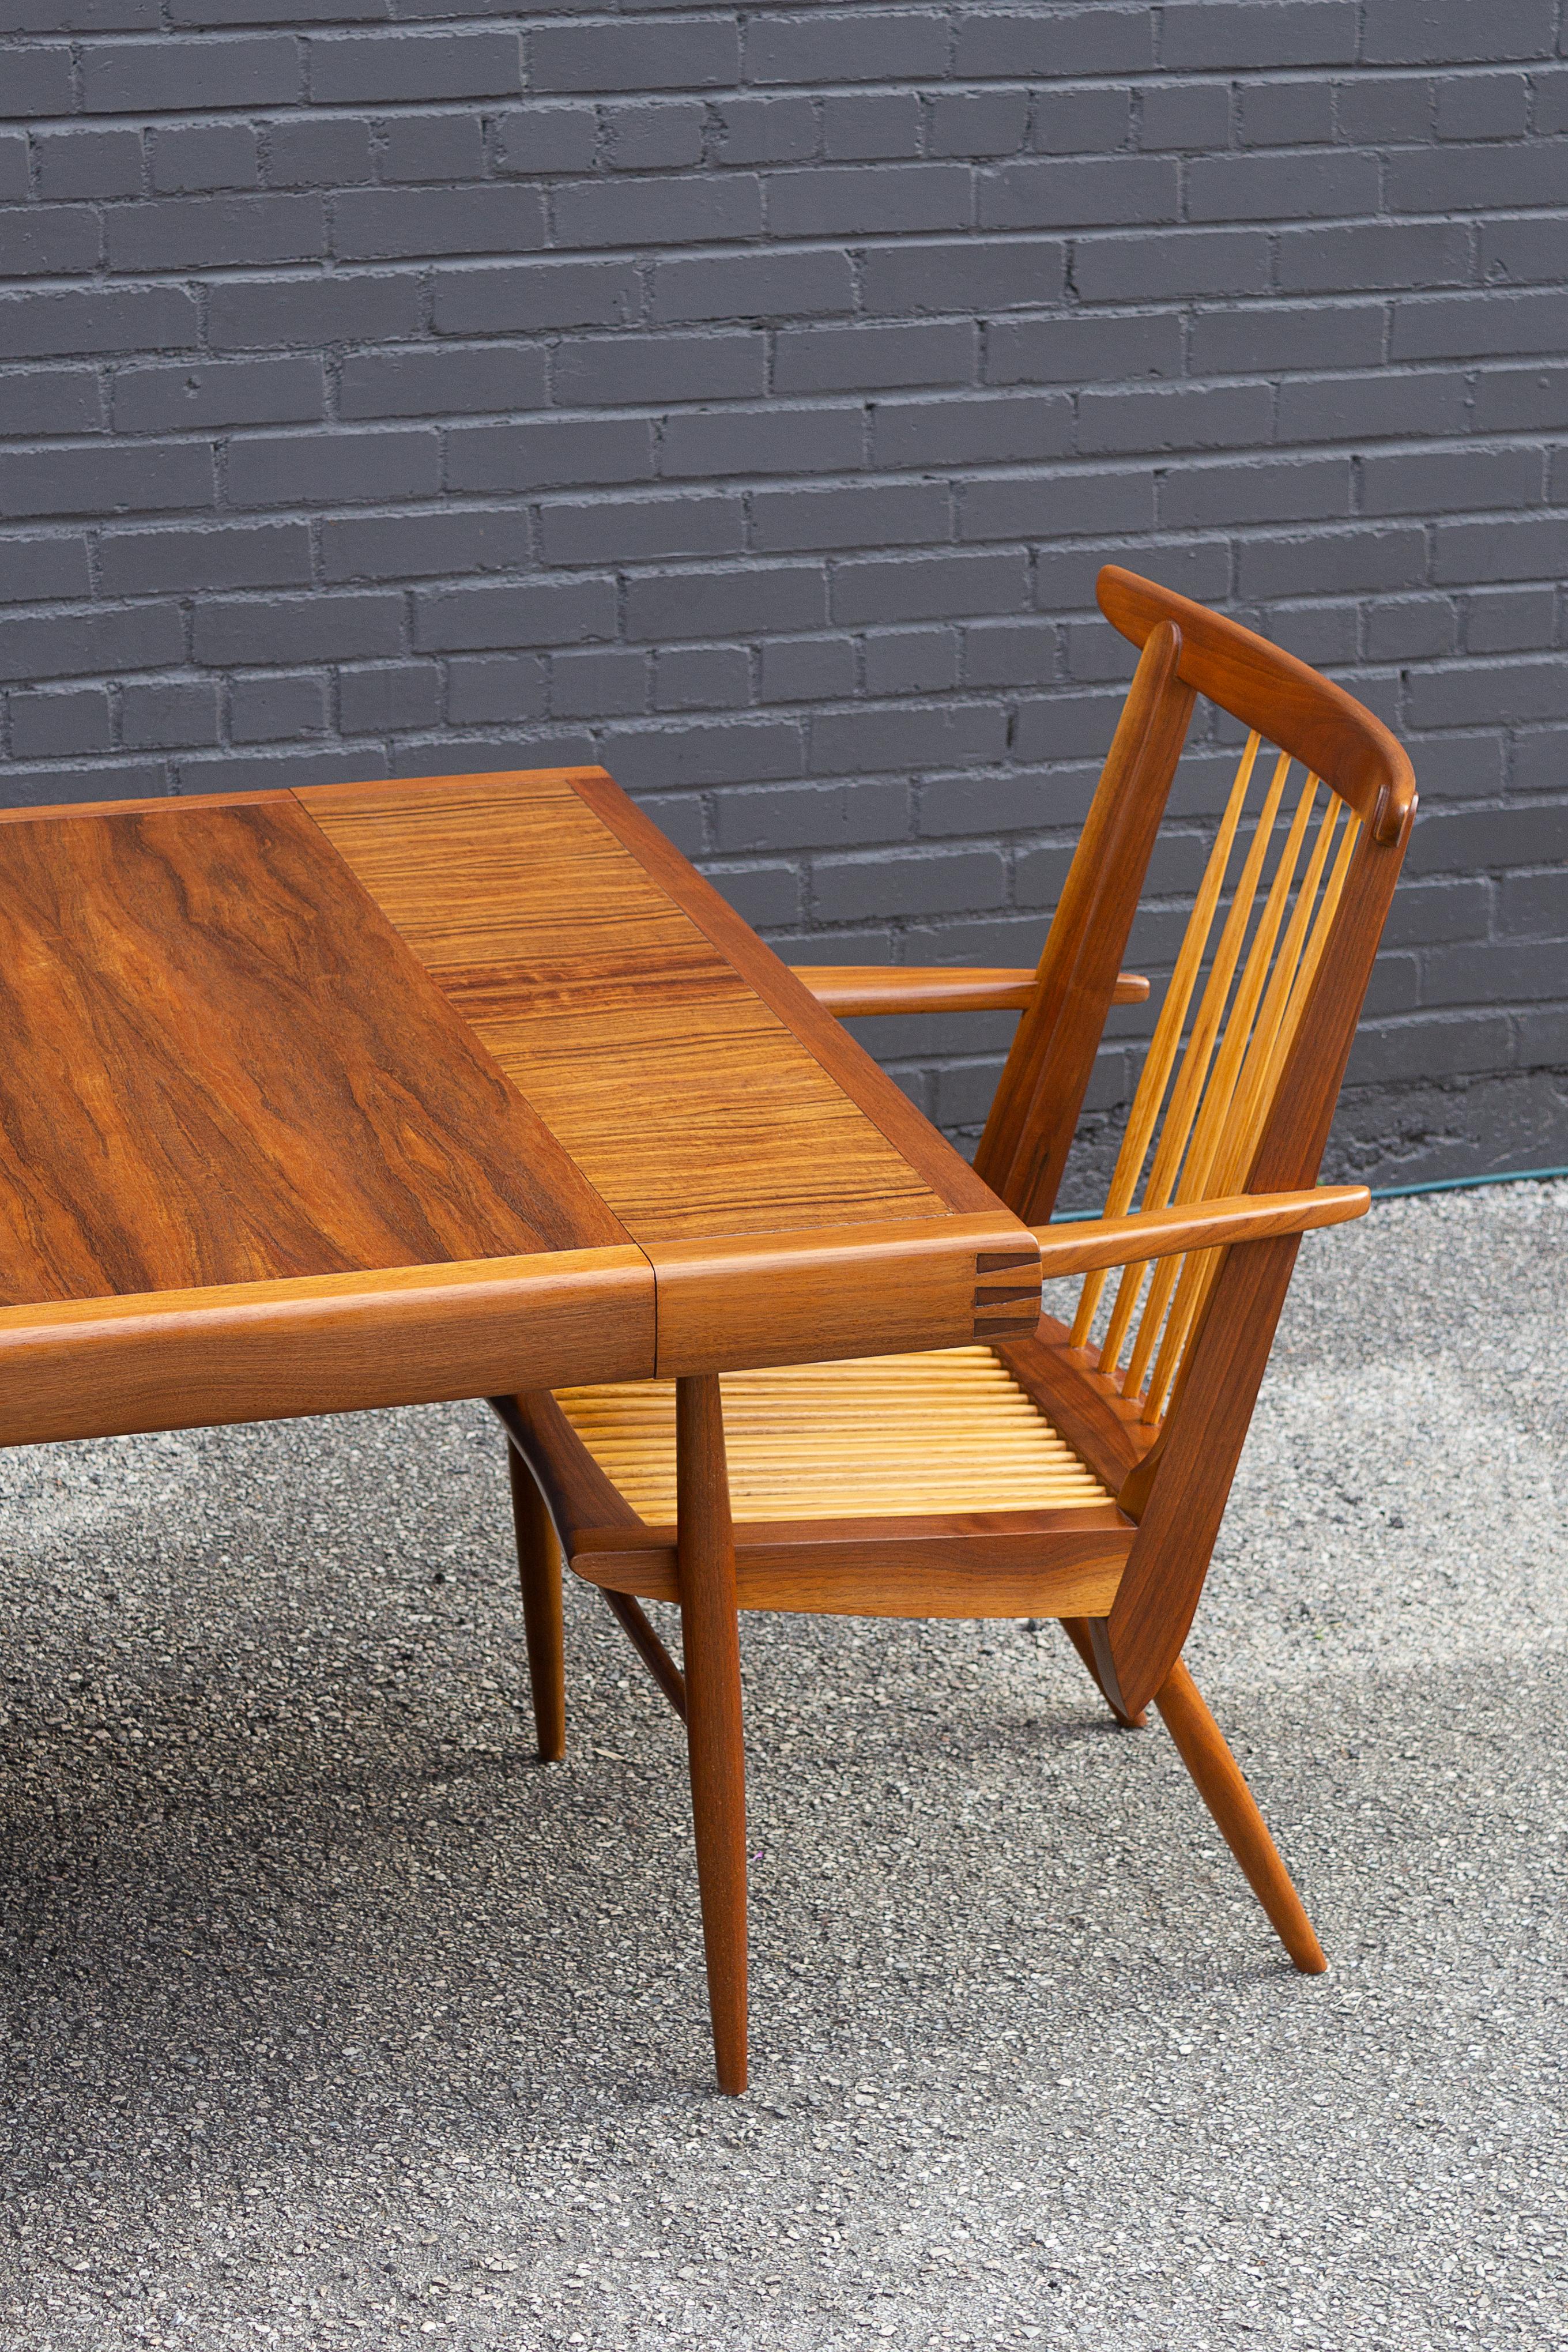 20th Century George Nakashima Dining Table & Chairs Widdicomb Origins Collection 1959